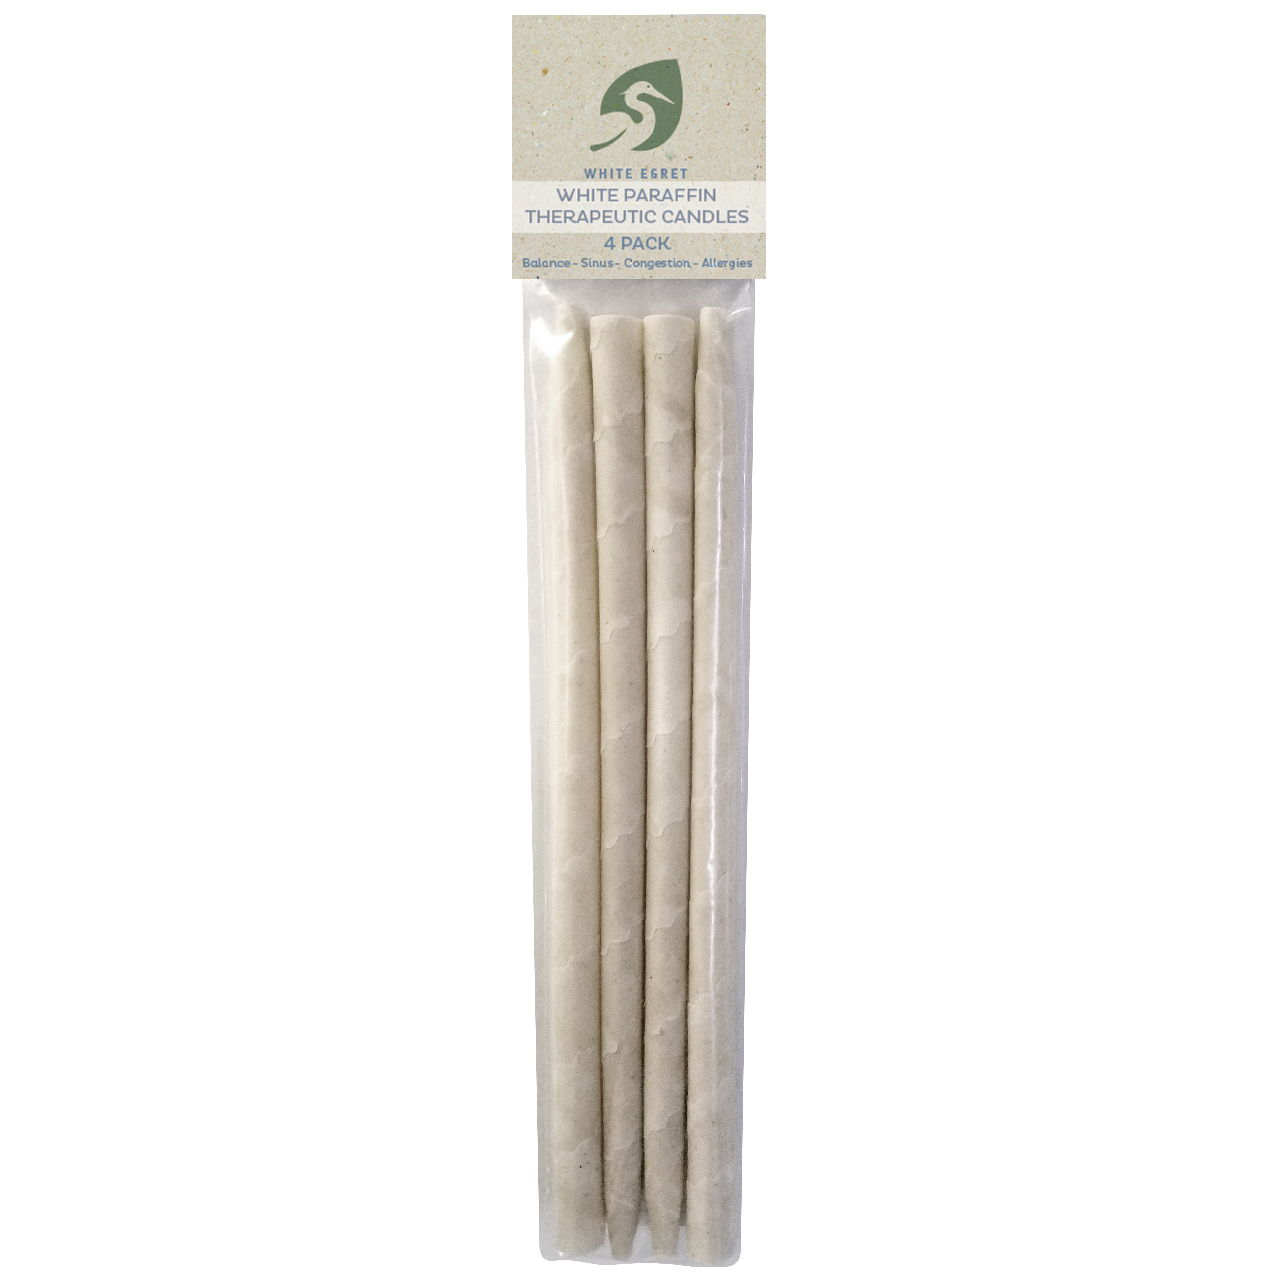 White Paraffin Ear Candles - INVENTORY SALE - White Egret Personal Care